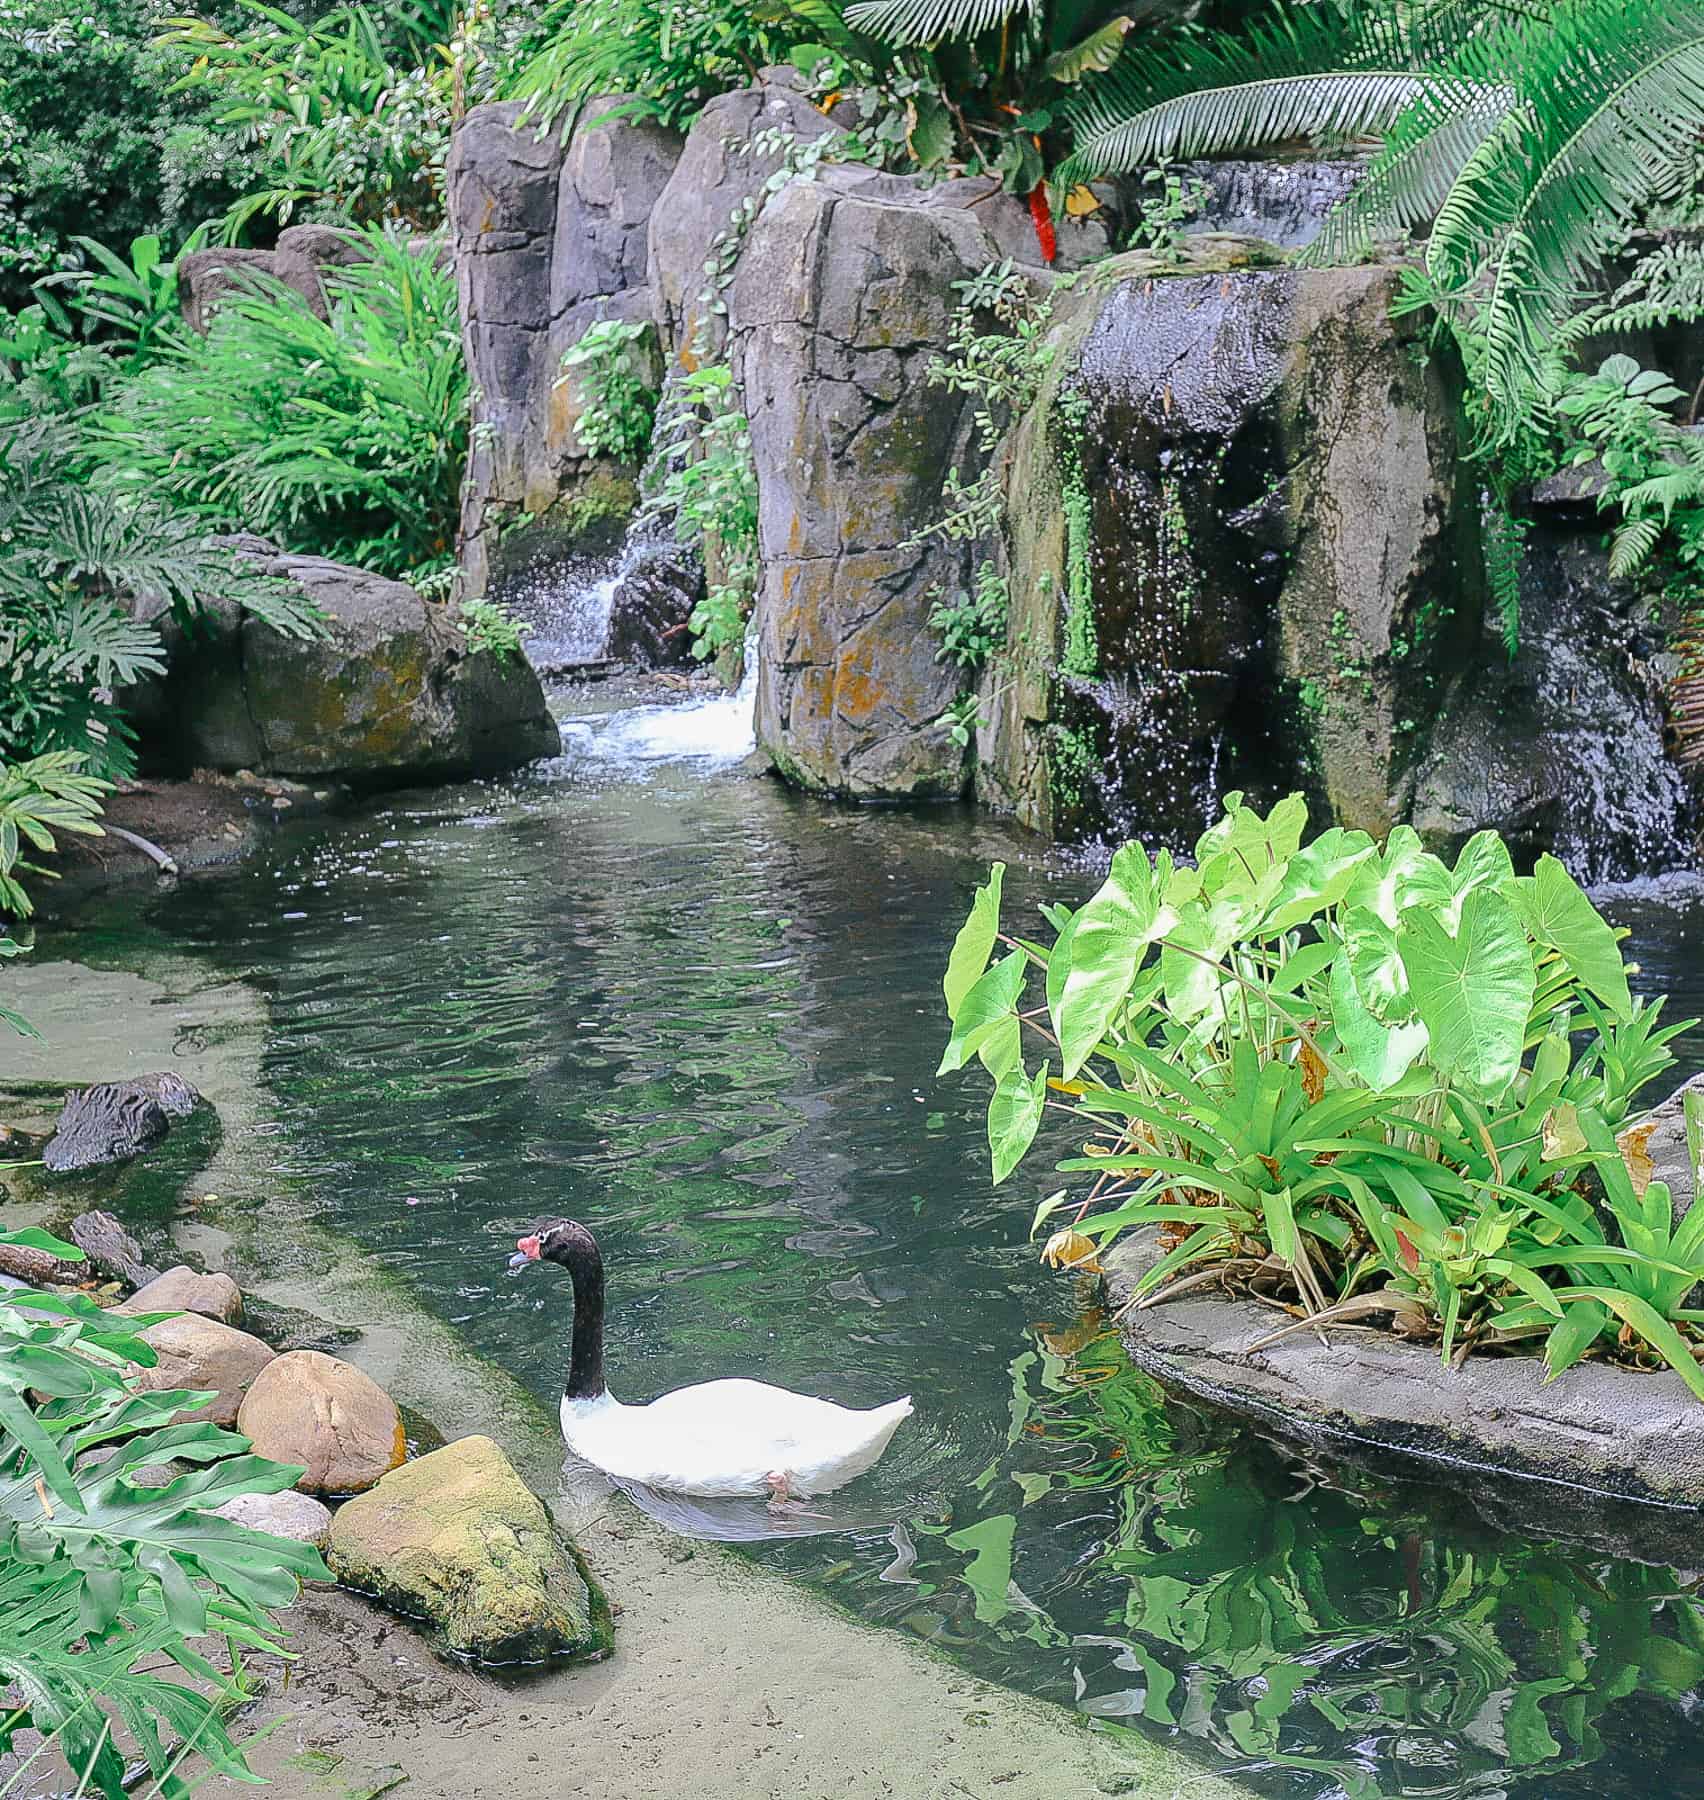 a closeup view of a black and white swan in The Oasis at Disney's Animal Kingdom.